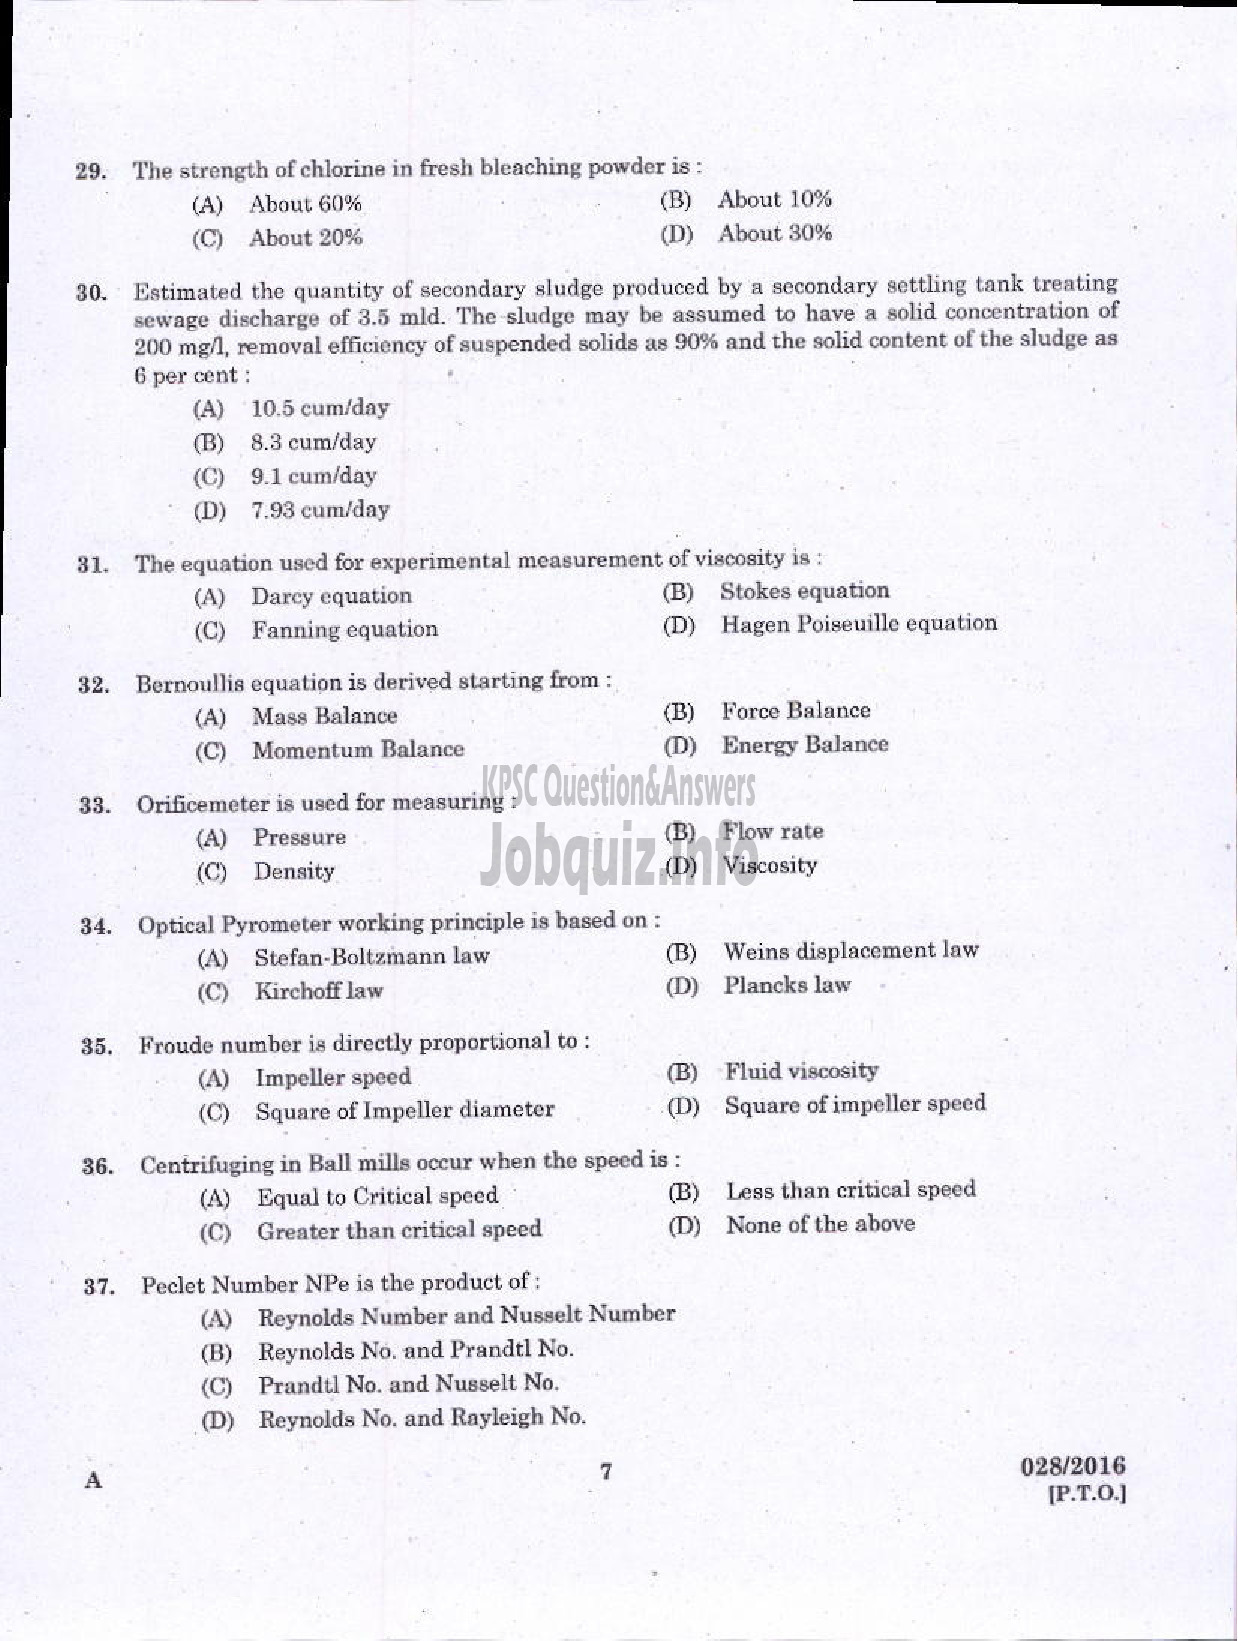 Kerala PSC Question Paper - ASSISTANT ENGINEER DIRECT/BY TRANSFER KERALA WATER AUTHORITY-5